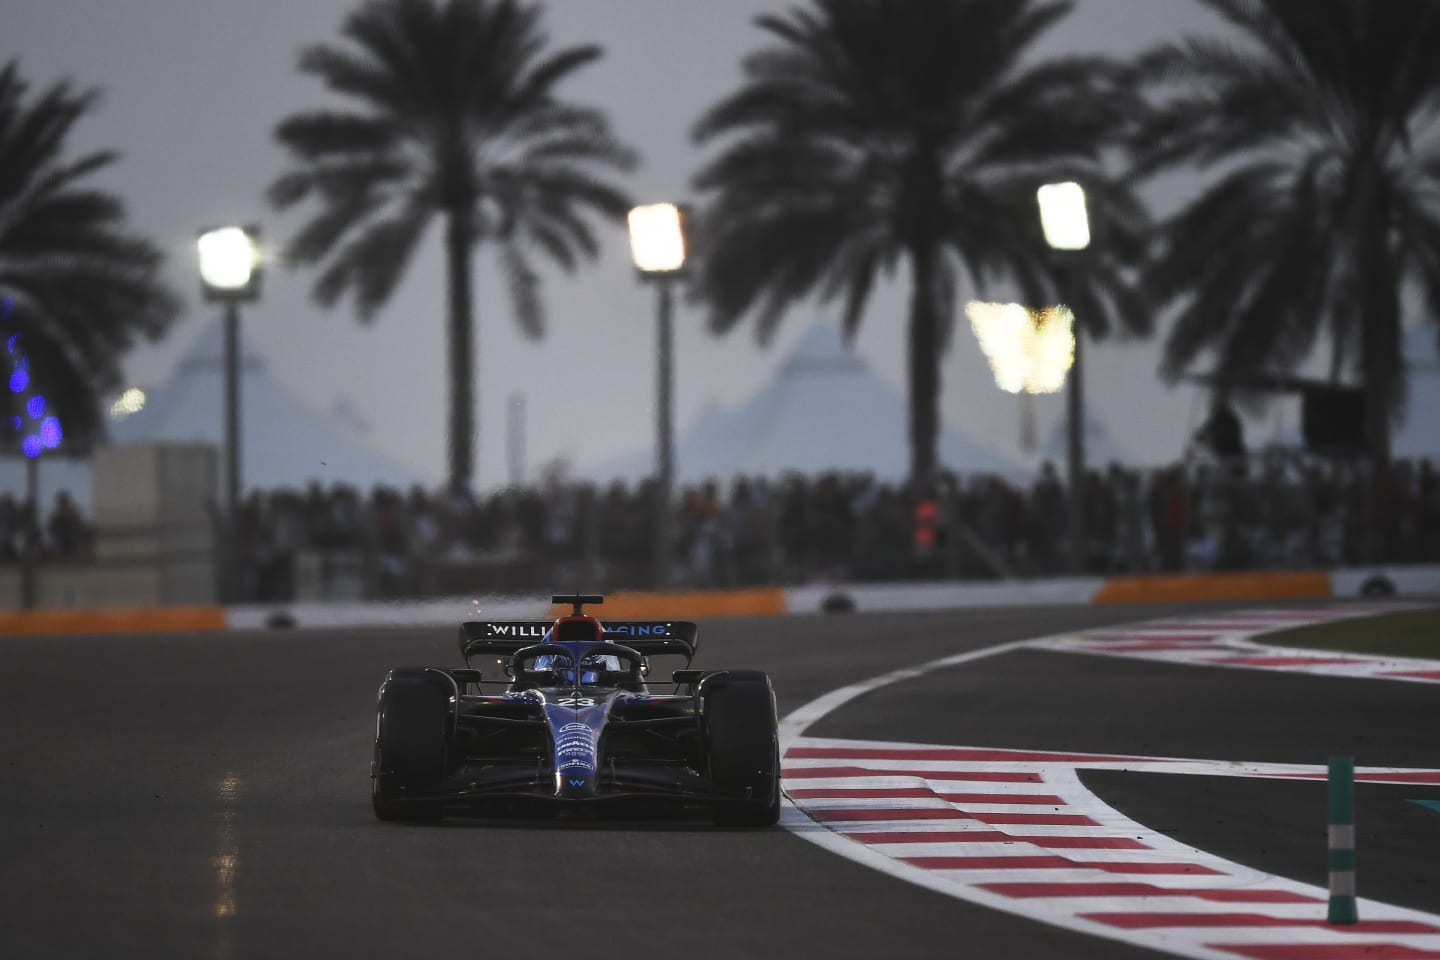 ABU DHABI, UNITED ARAB EMIRATES - NOVEMBER 20: Alexander Albon of Thailand driving the (23) Williams FW44 Mercedes on track during the F1 Grand Prix of Abu Dhabi at Yas Marina Circuit on November 20, 2022 in Abu Dhabi, United Arab Emirates. (Photo by Rudy Carezzevoli/Getty Images)